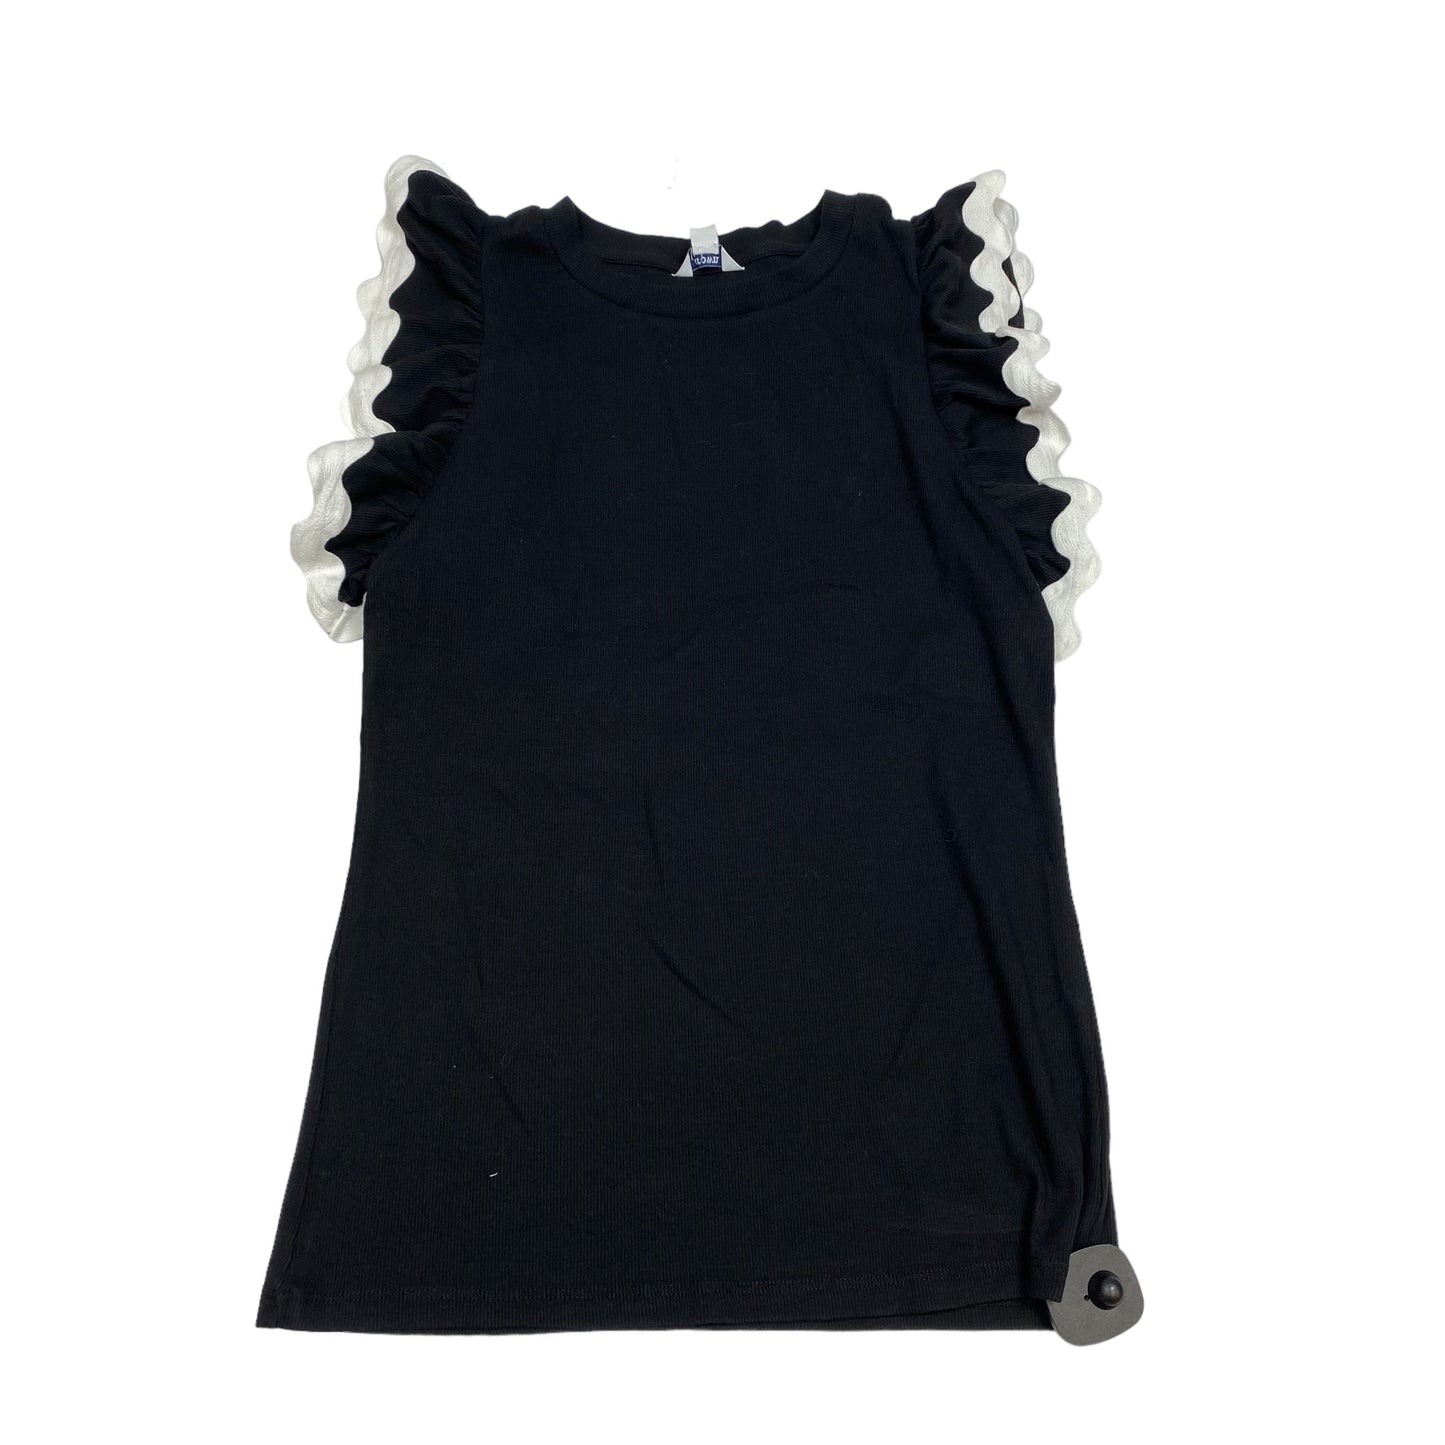 Black Top Sleeveless Crown And Ivy, Size S